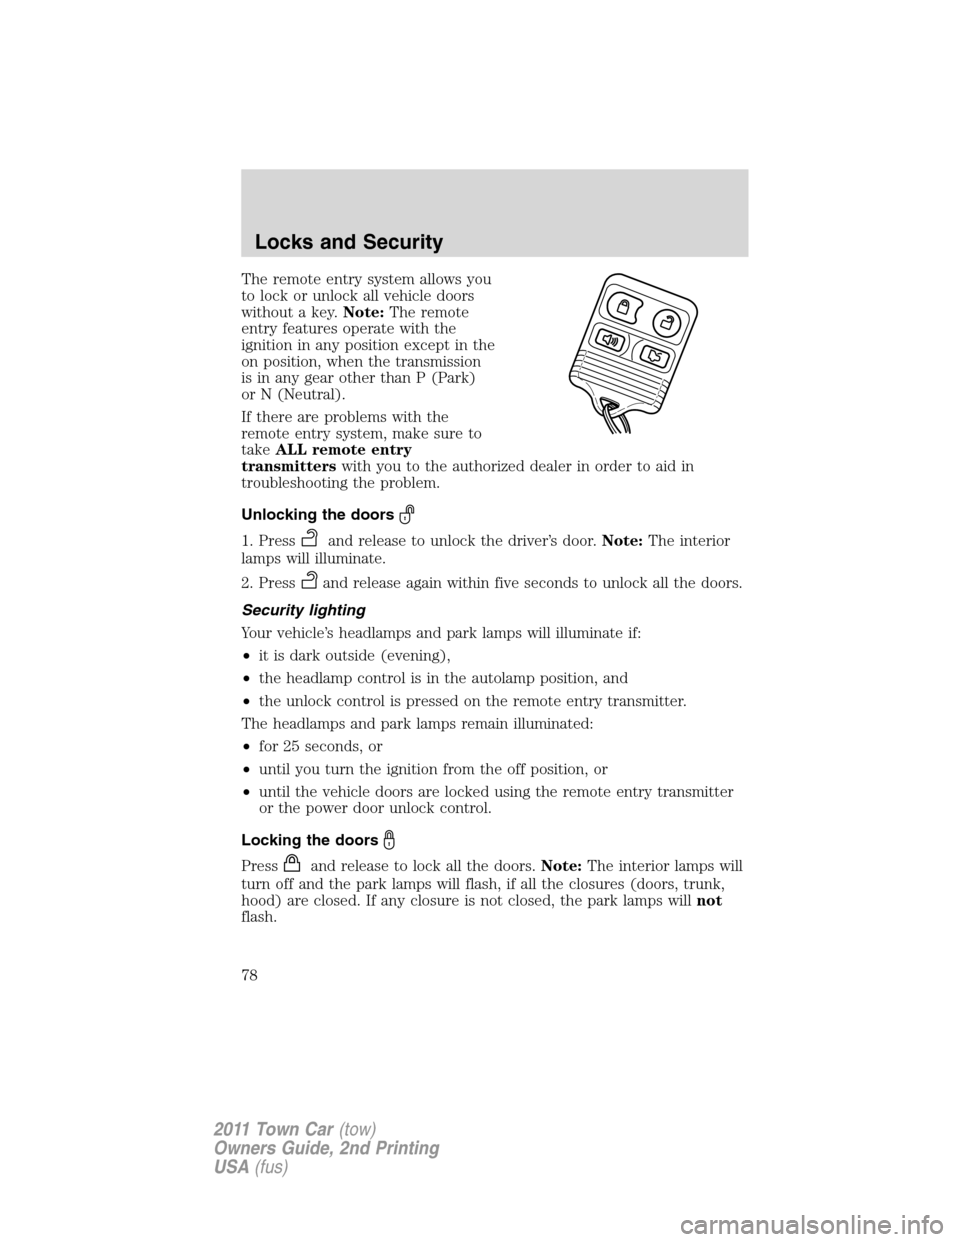 LINCOLN TOWN CAR 2011  Owners Manual The remote entry system allows you
to lock or unlock all vehicle doors
without a key.Note:The remote
entry features operate with the
ignition in any position except in the
on position, when the transm